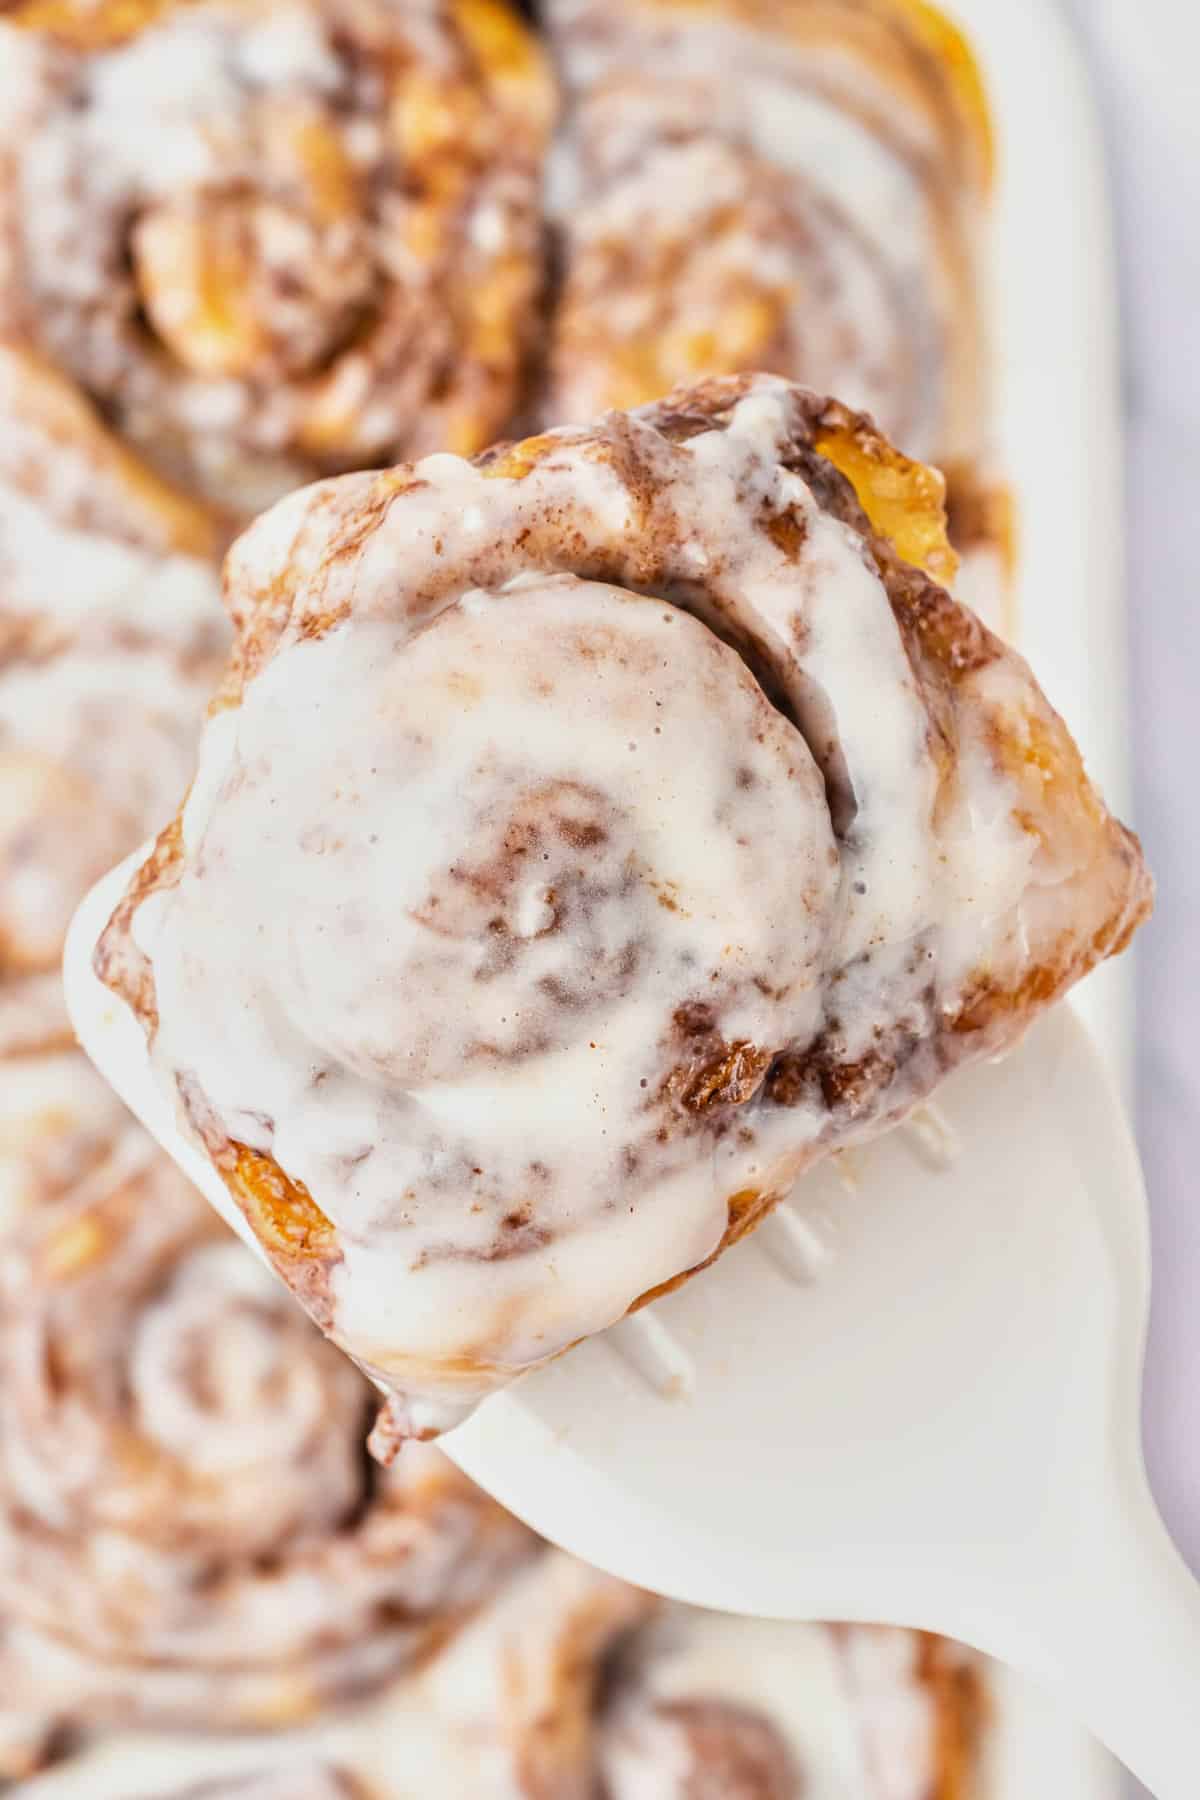 A spatula lifting up a cinnamon roll out of a pan.